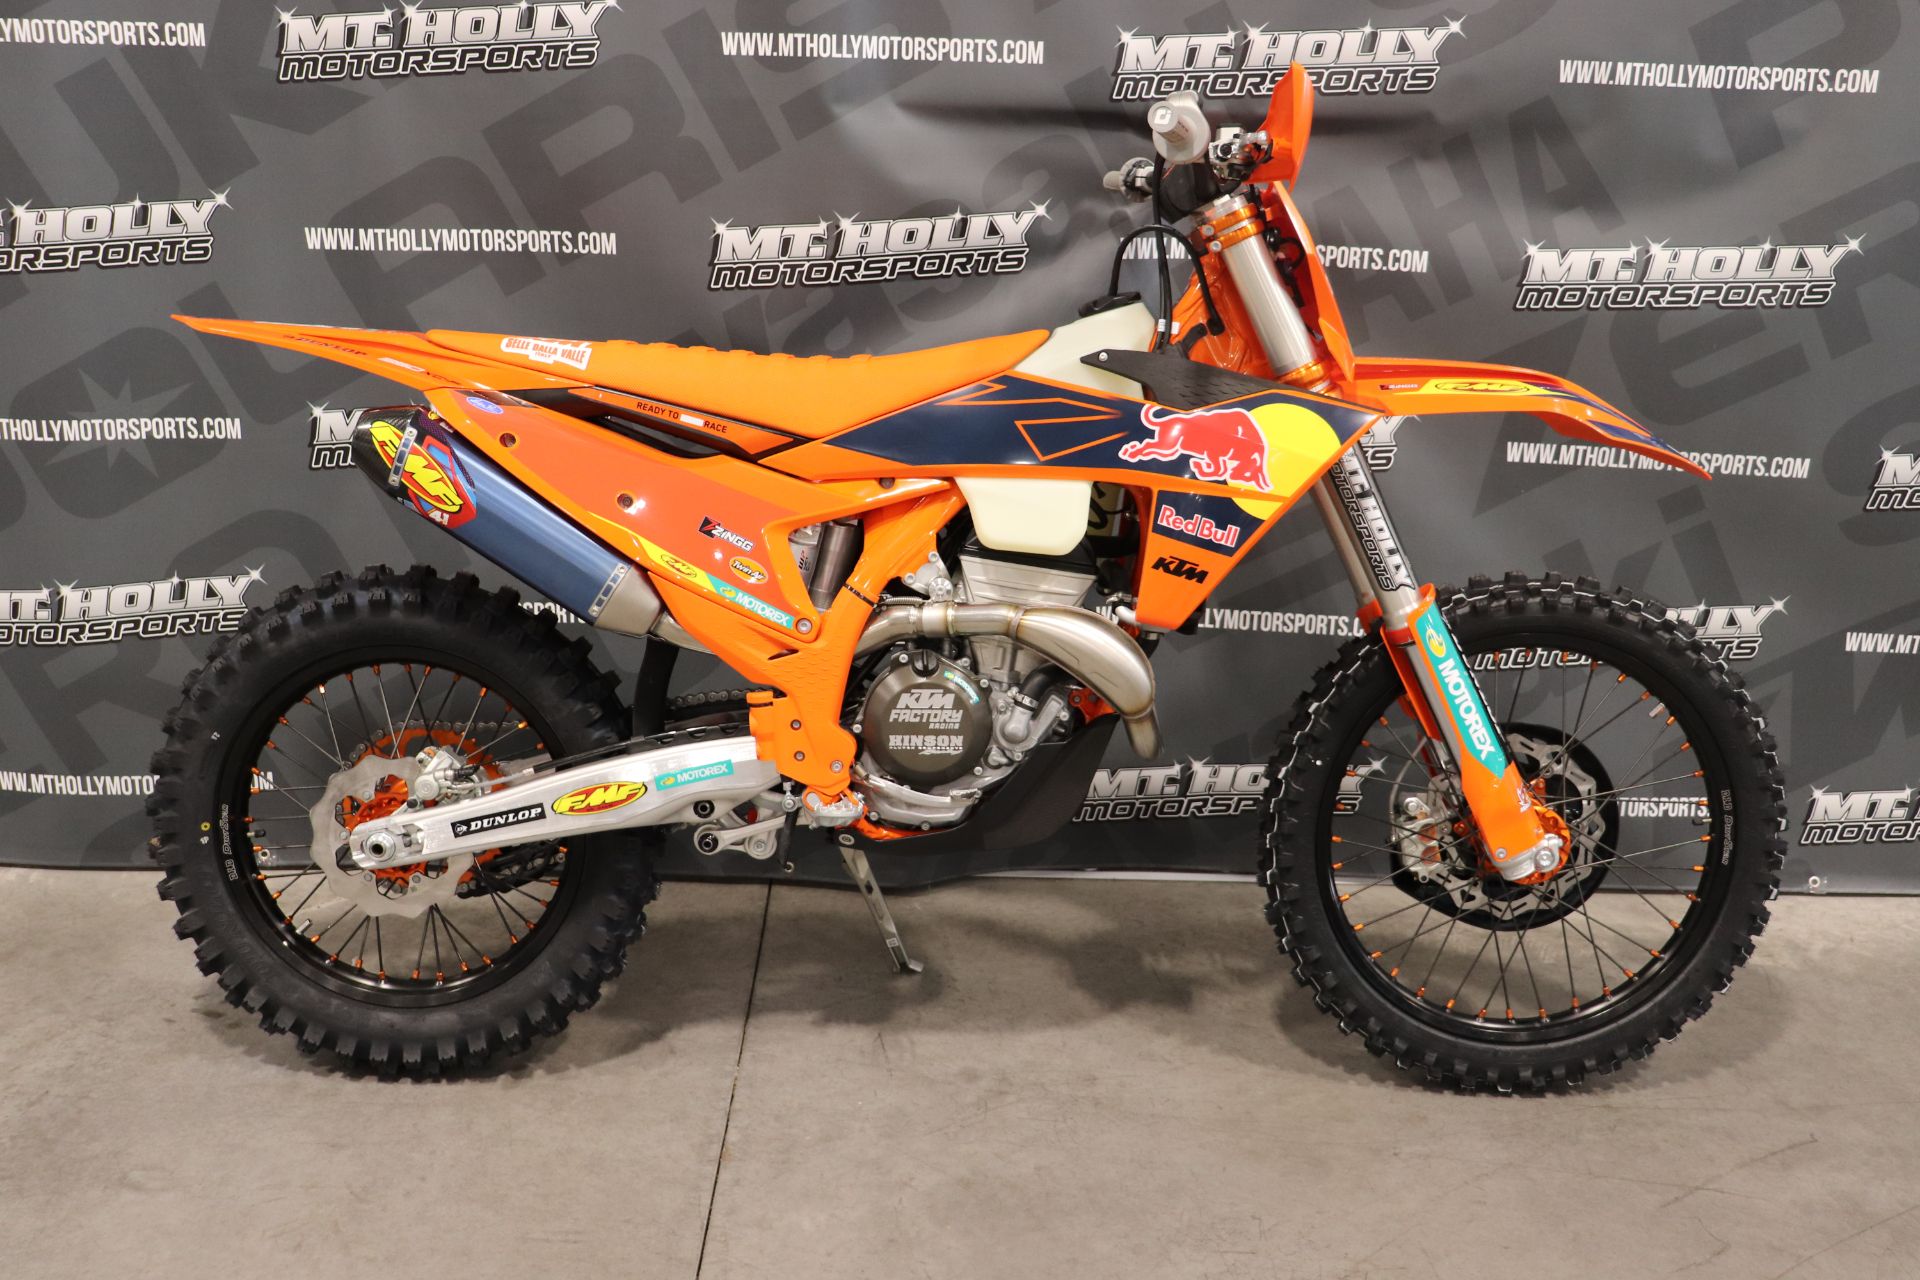 2024 KTM 350 XC-F Factory Edition in Vincentown, New Jersey - Photo 1